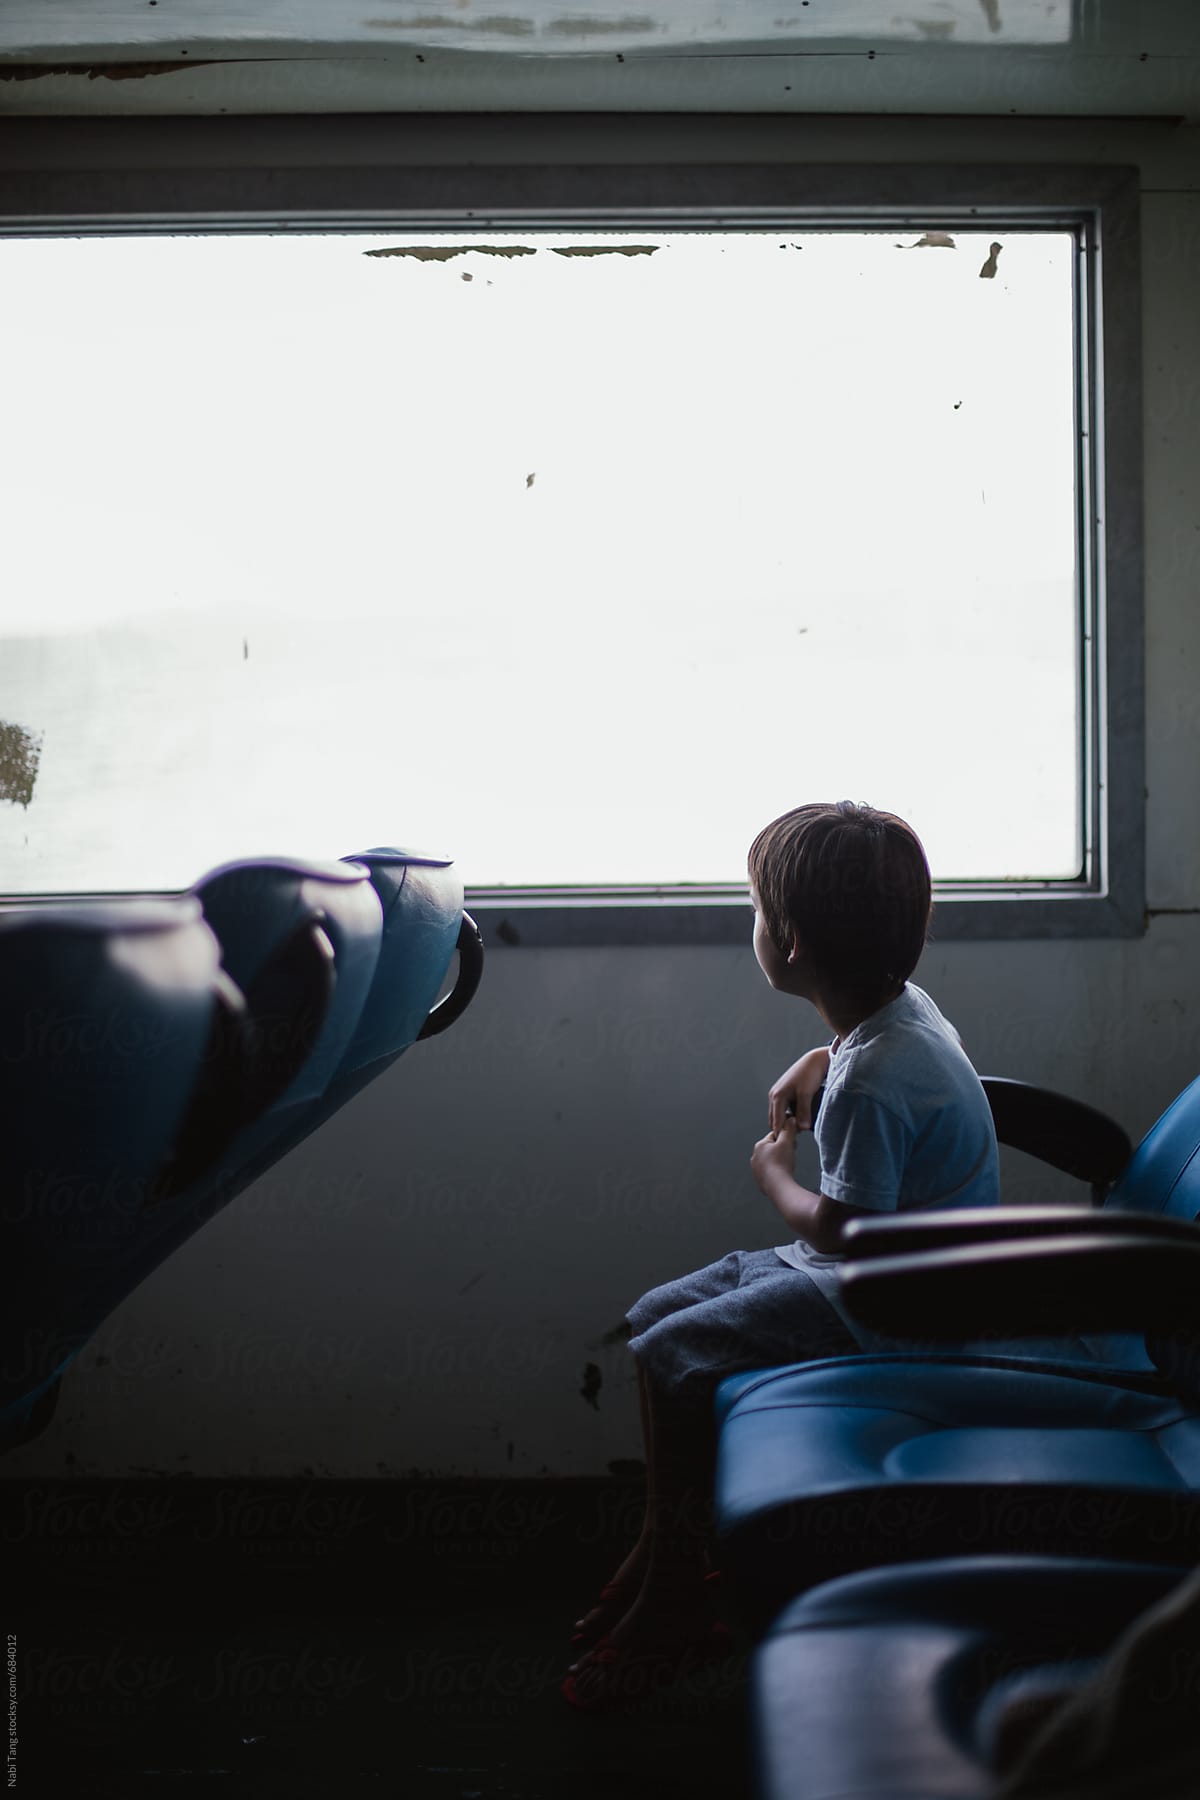 A boy chilling on the ferry looking outside of the window